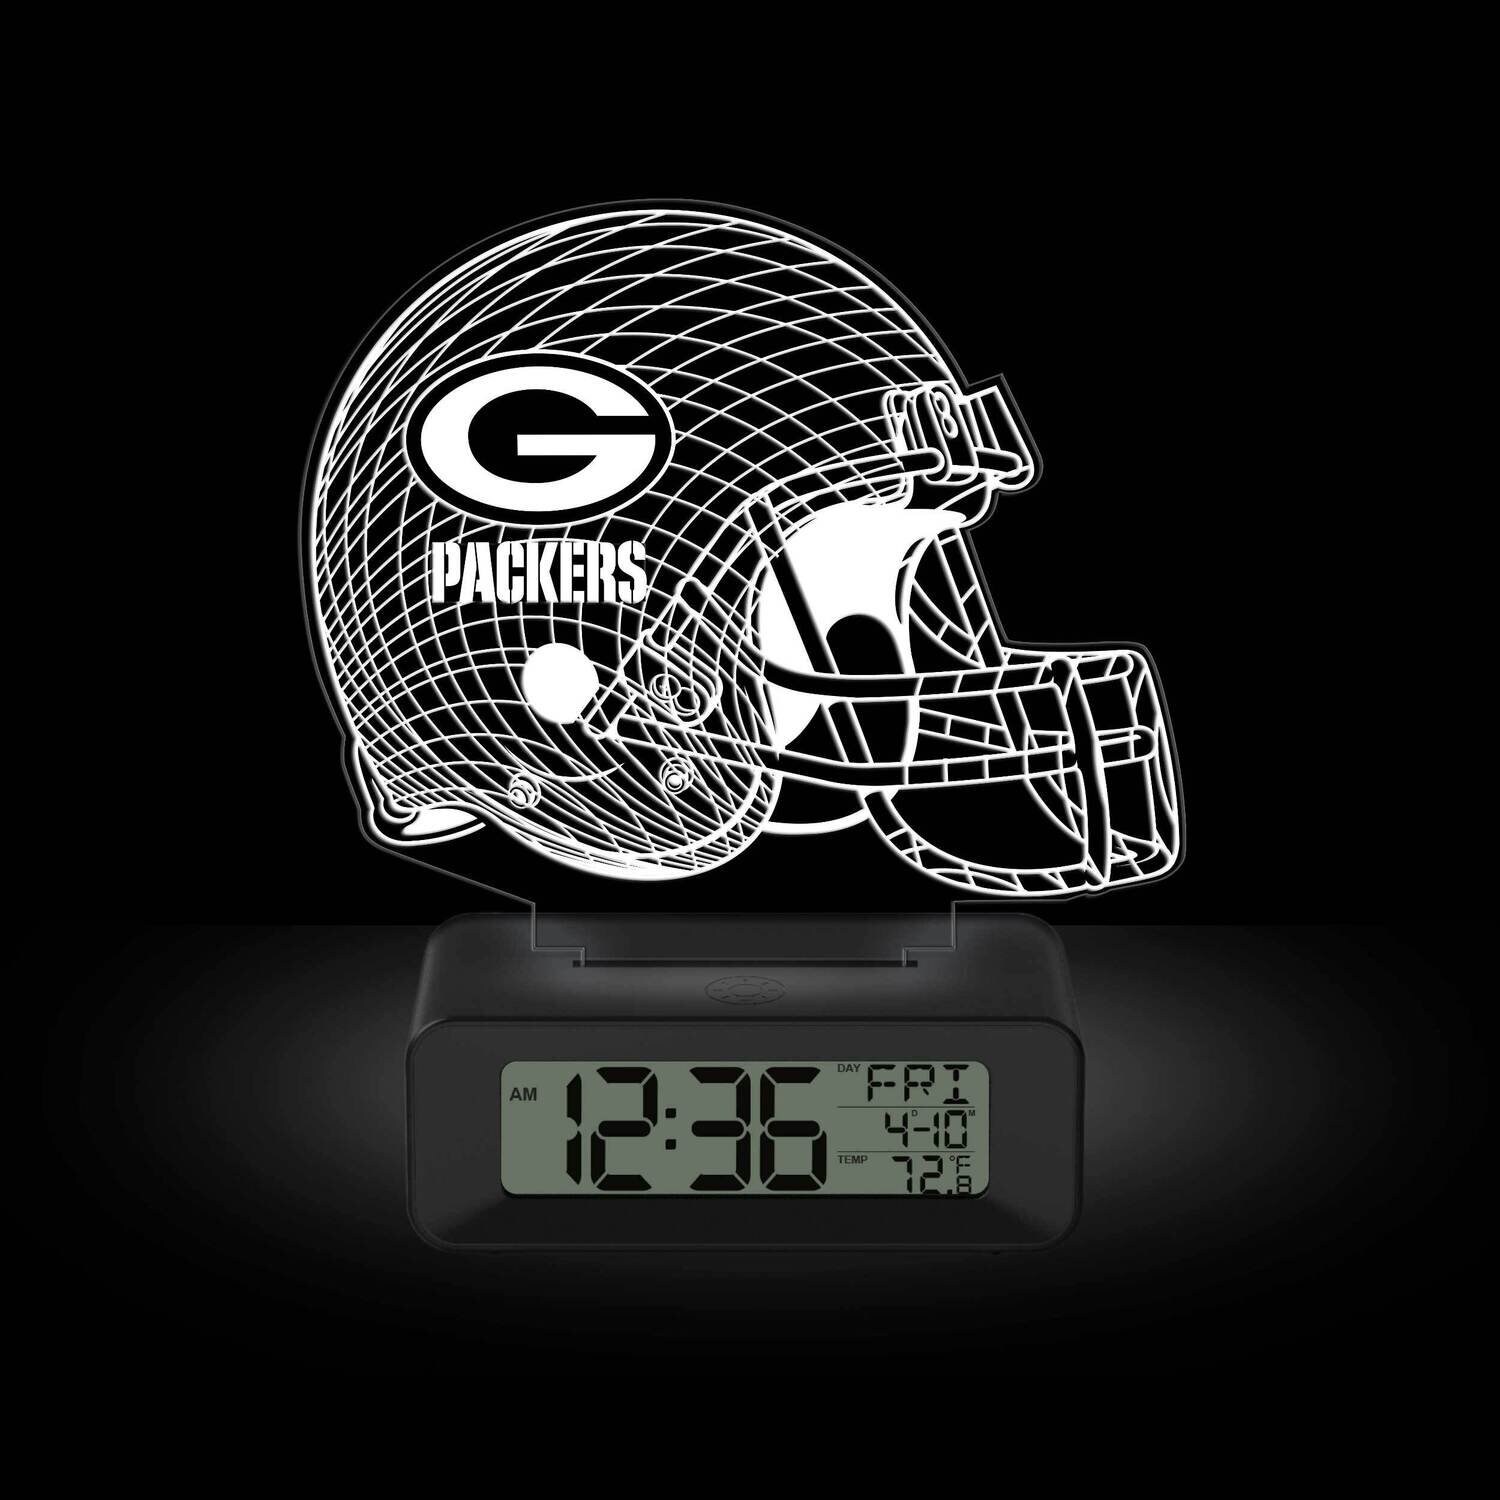 Game Time Green Bay Packers LED 3D Illusion Alarm Clock GM25317-GB